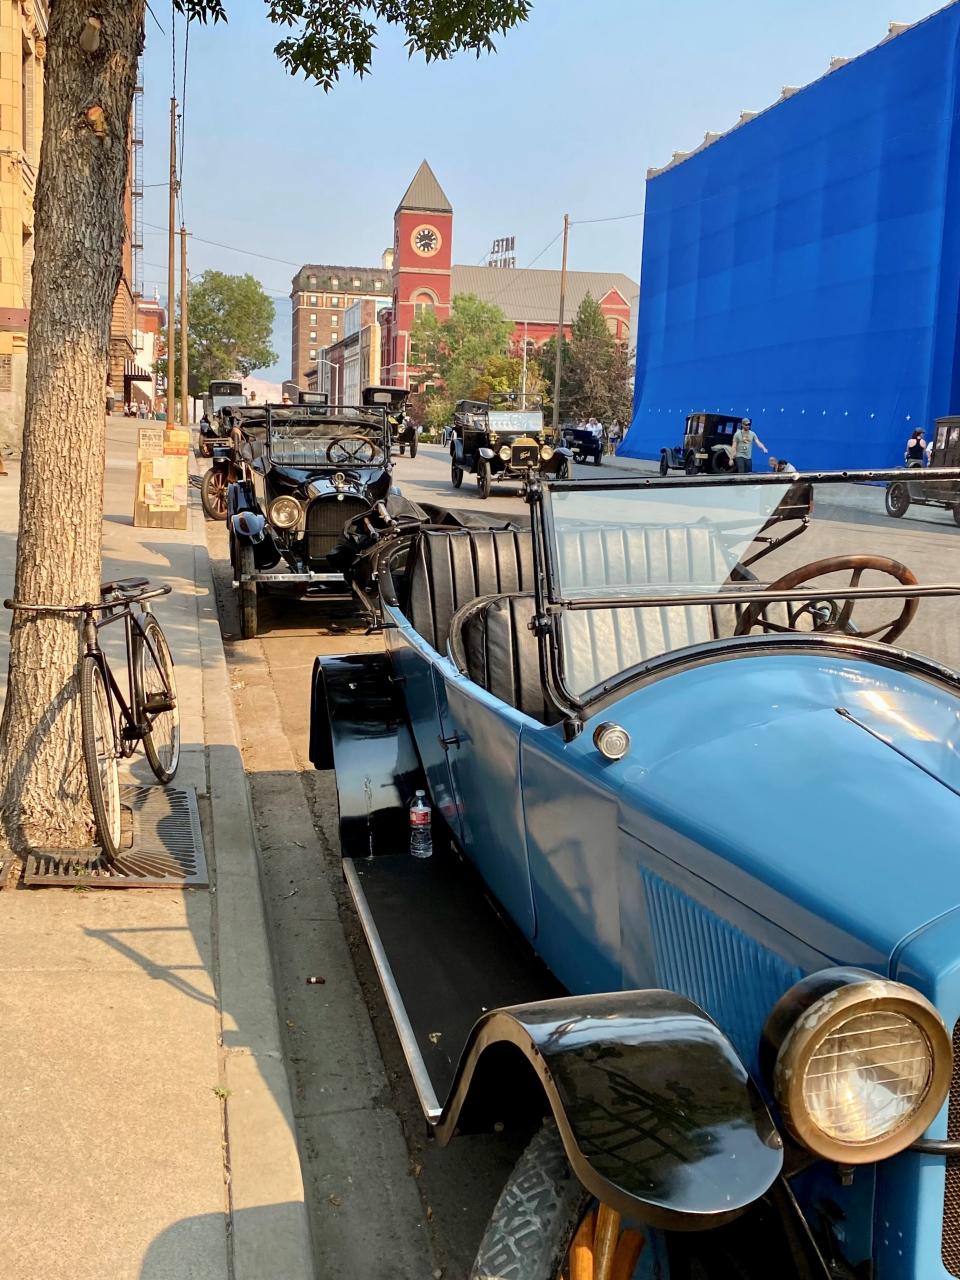 Old meets new on the Butte, Montana set of "1923" where Palm Beach resident Carey O'Donnell spent days working as an extra. The cars are vintage, but the building was not, so it was draped in blue to be digitally replaced.